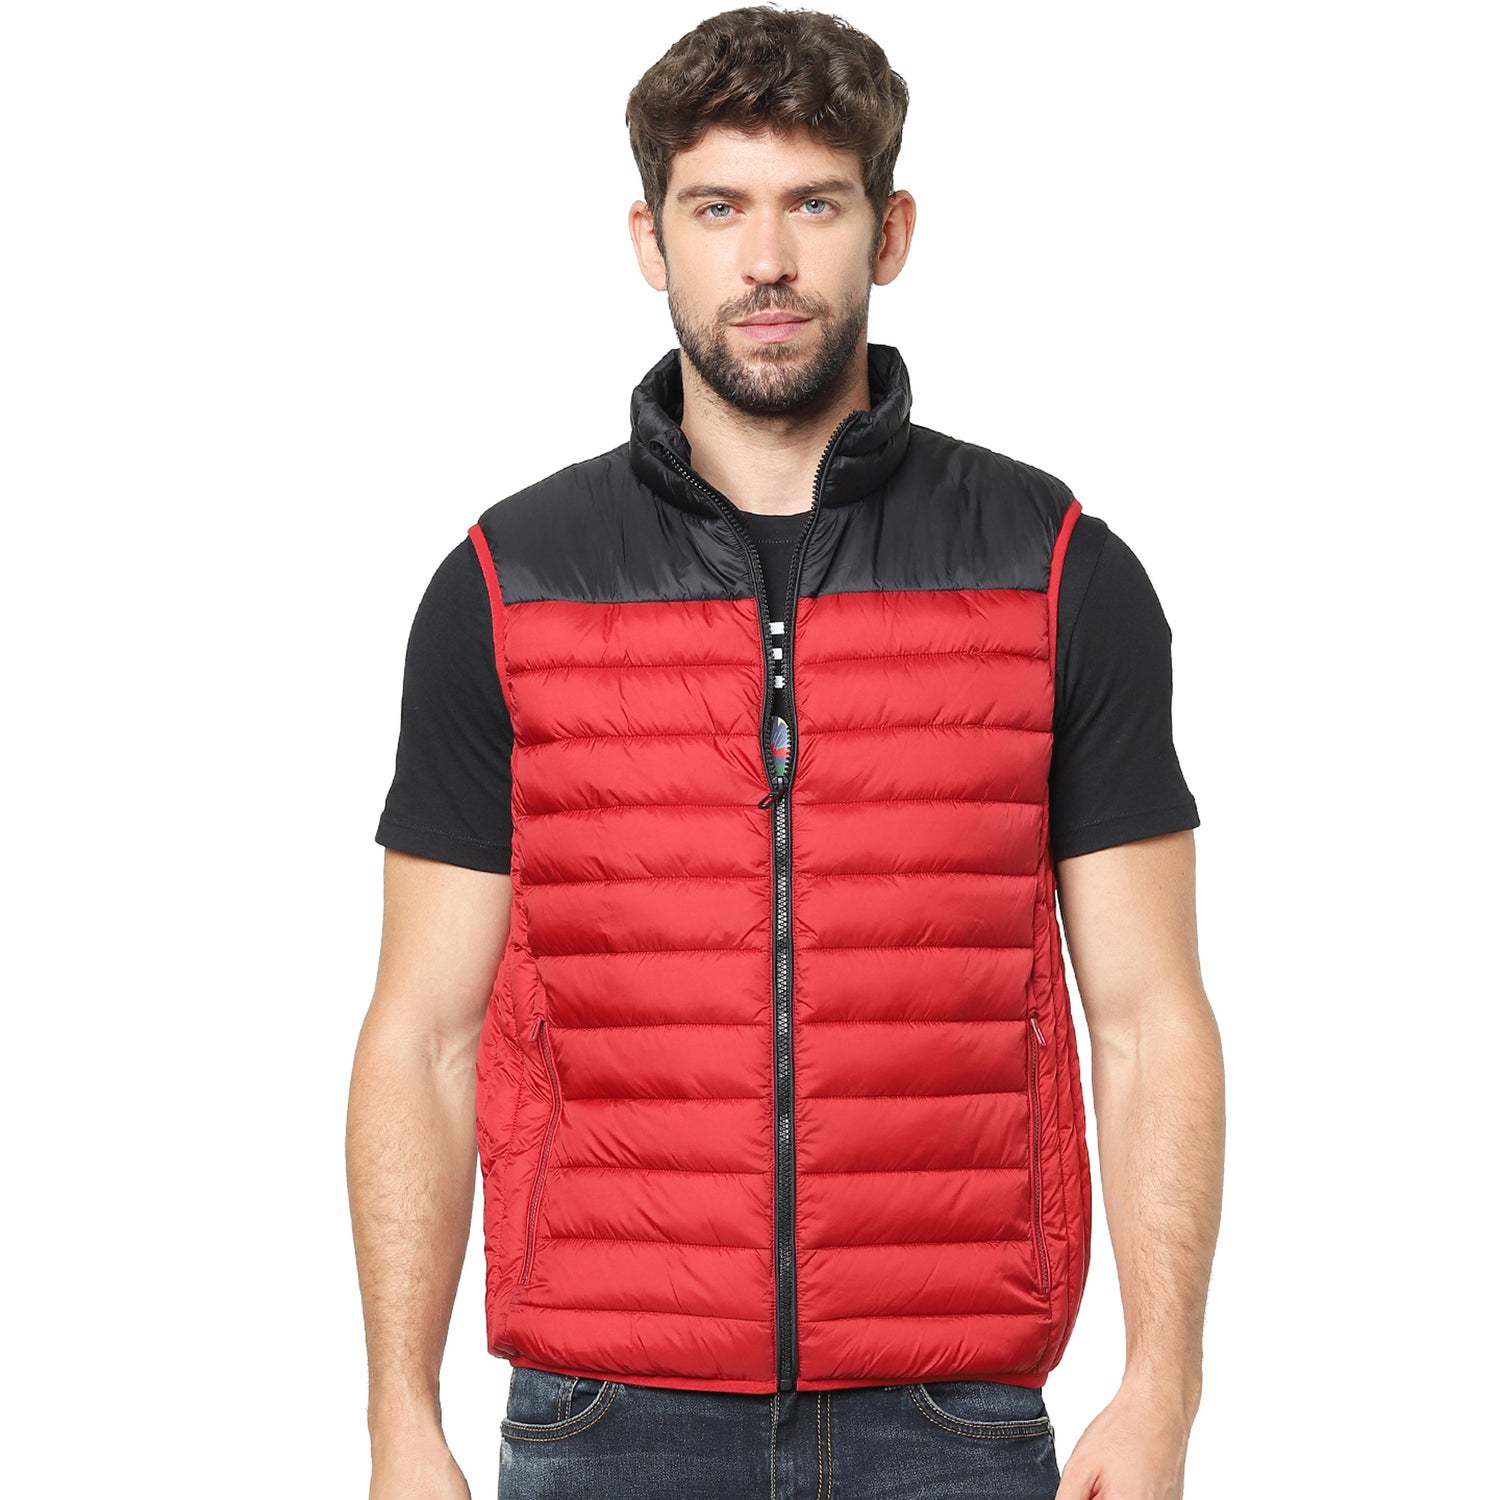 Red and Black Colourblocked Puffer Jacket (VULESSBLOC)